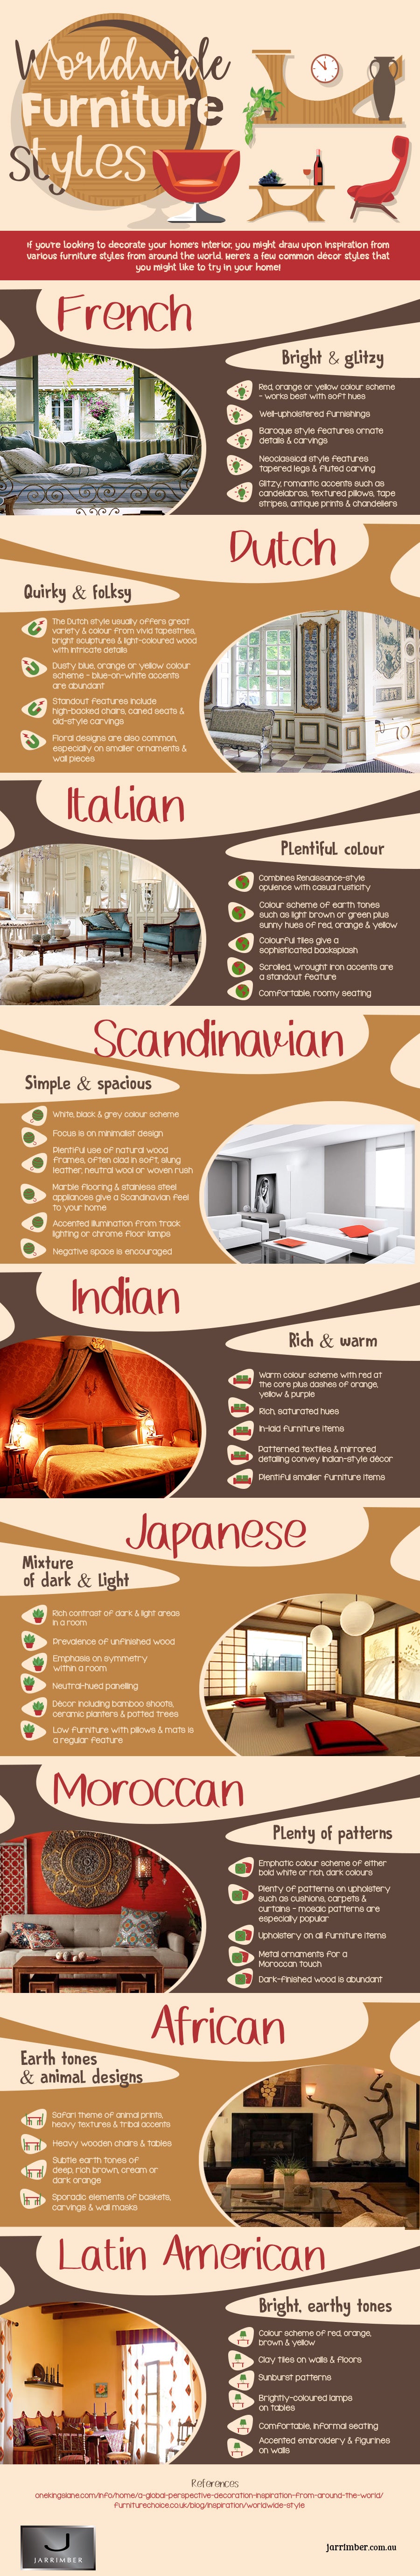 Worldwide Furniture Styles Infographic